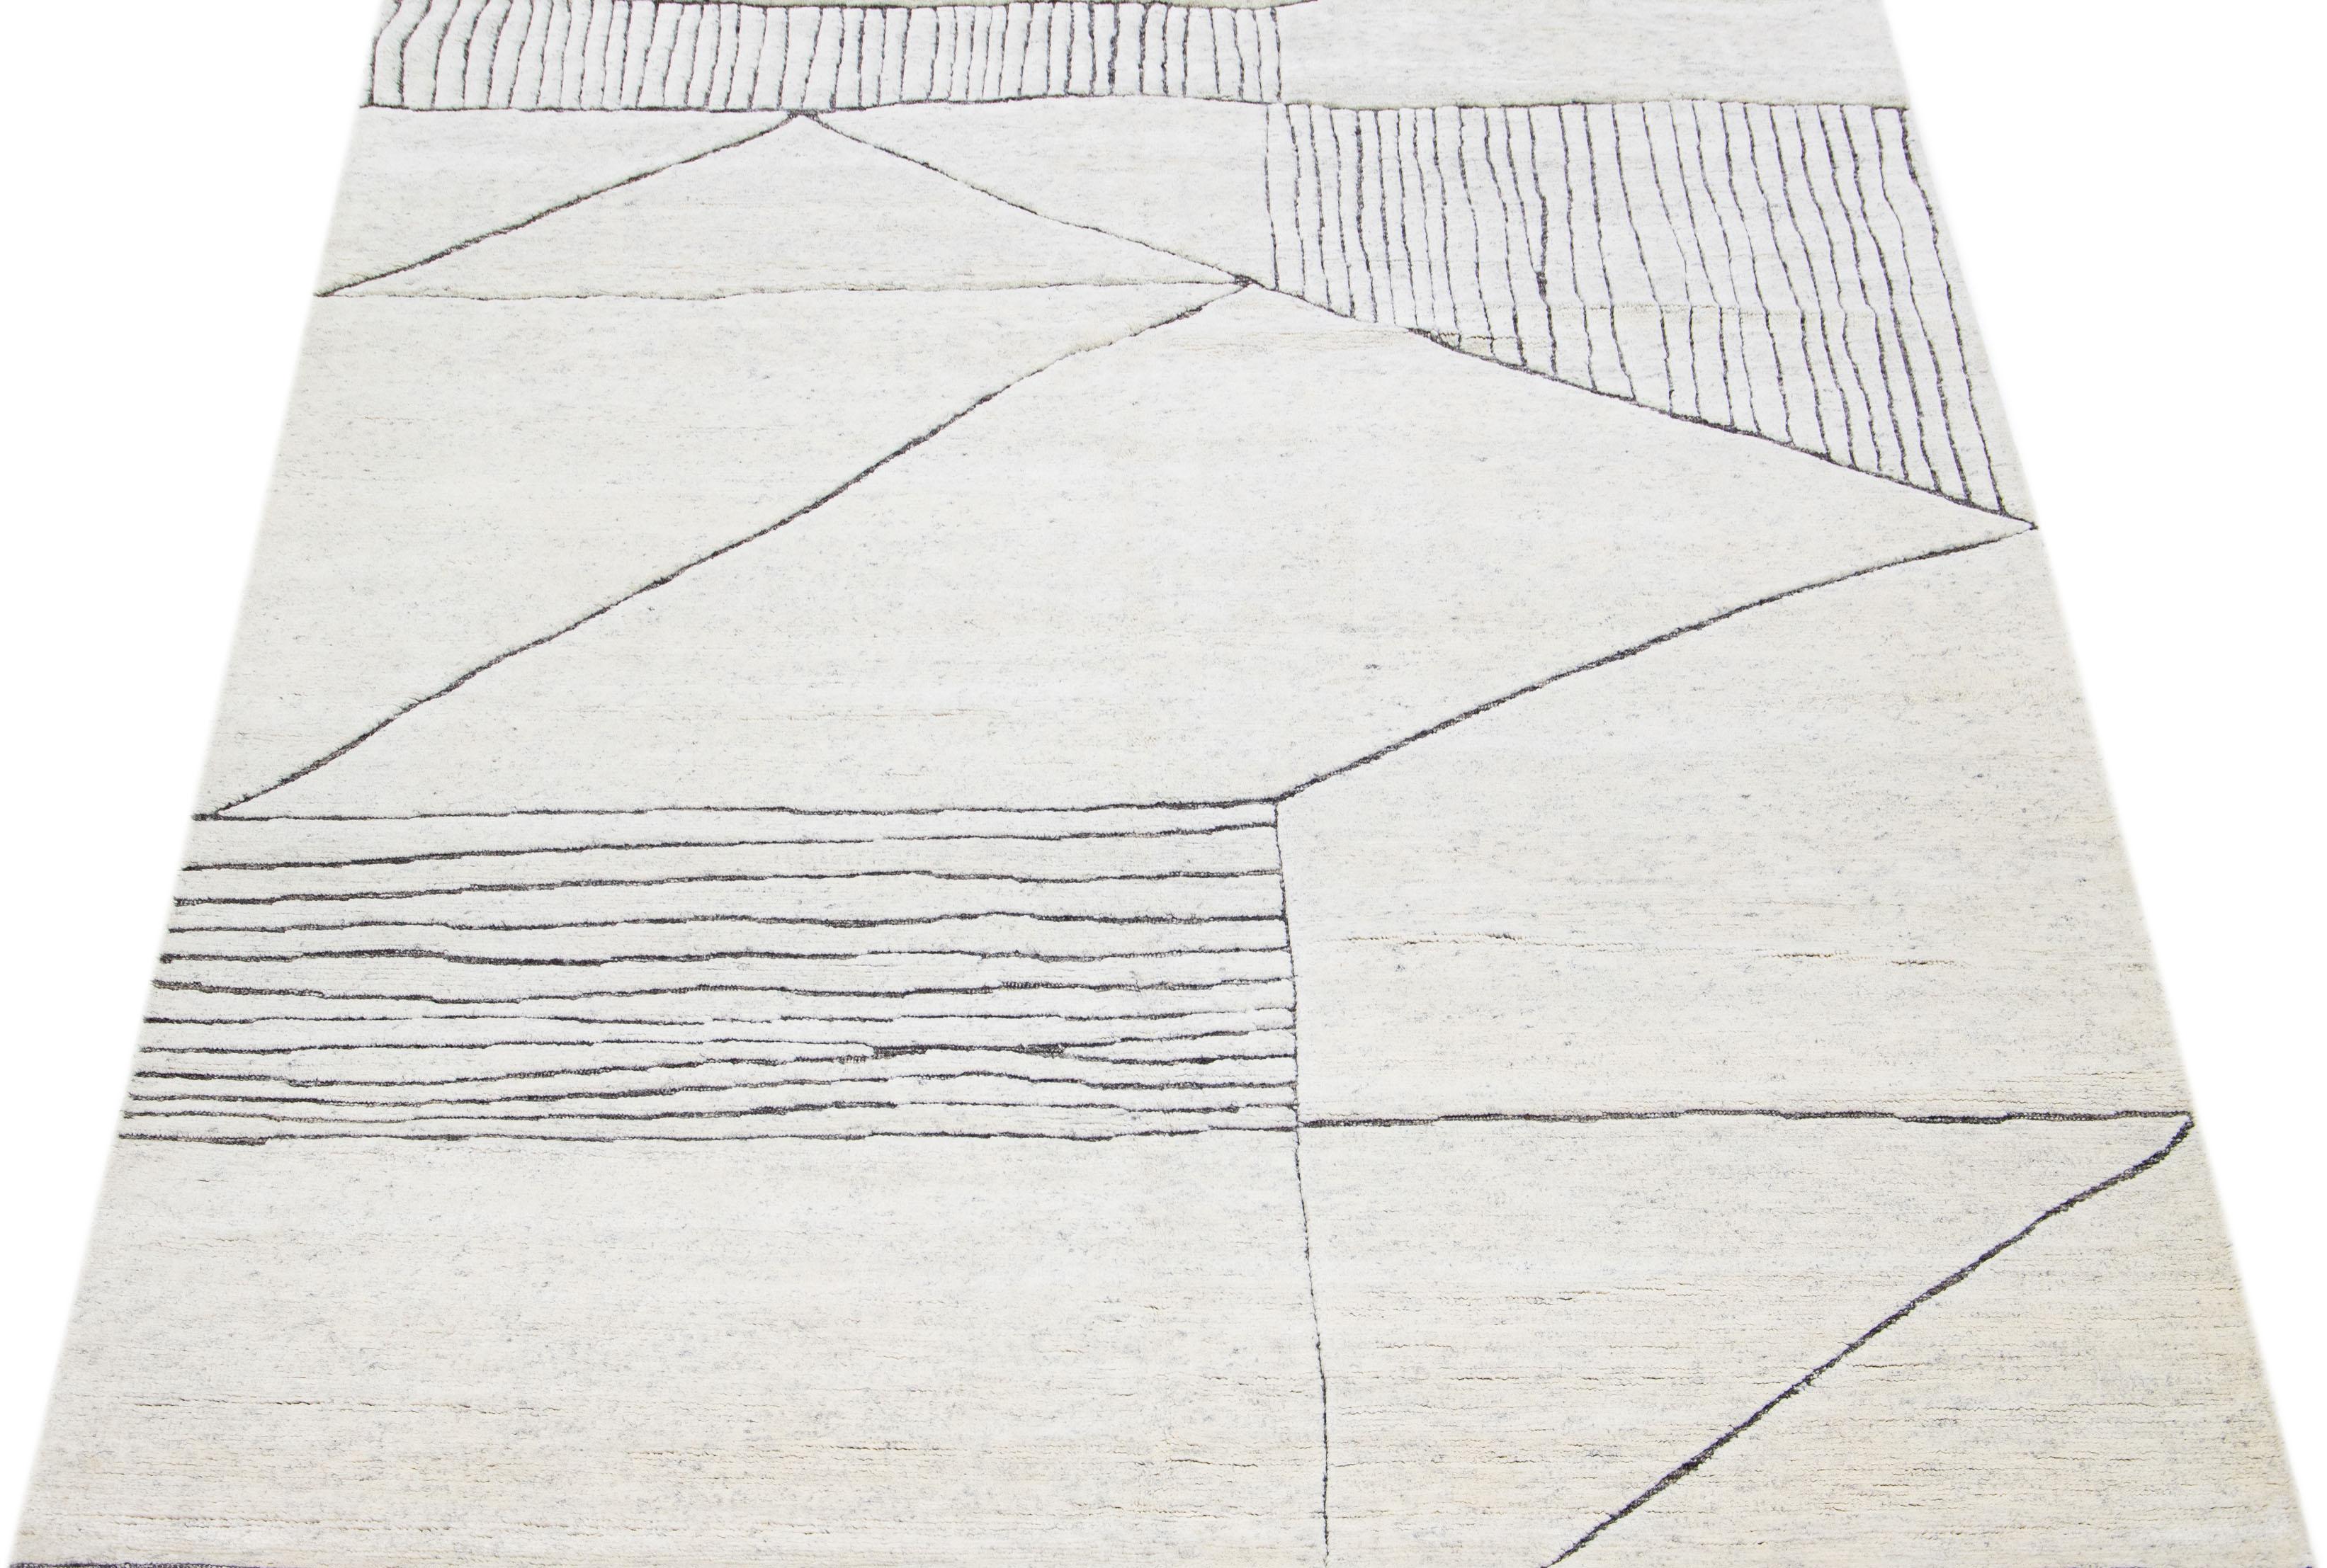 This luxurious wool rug features a timeless Moroccan pattern in a contemporary abstract Minimalist style, utilizing ivory and gray tones to create a sleek and modern look. It is crafted using traditional hand-knotting techniques, ensuring